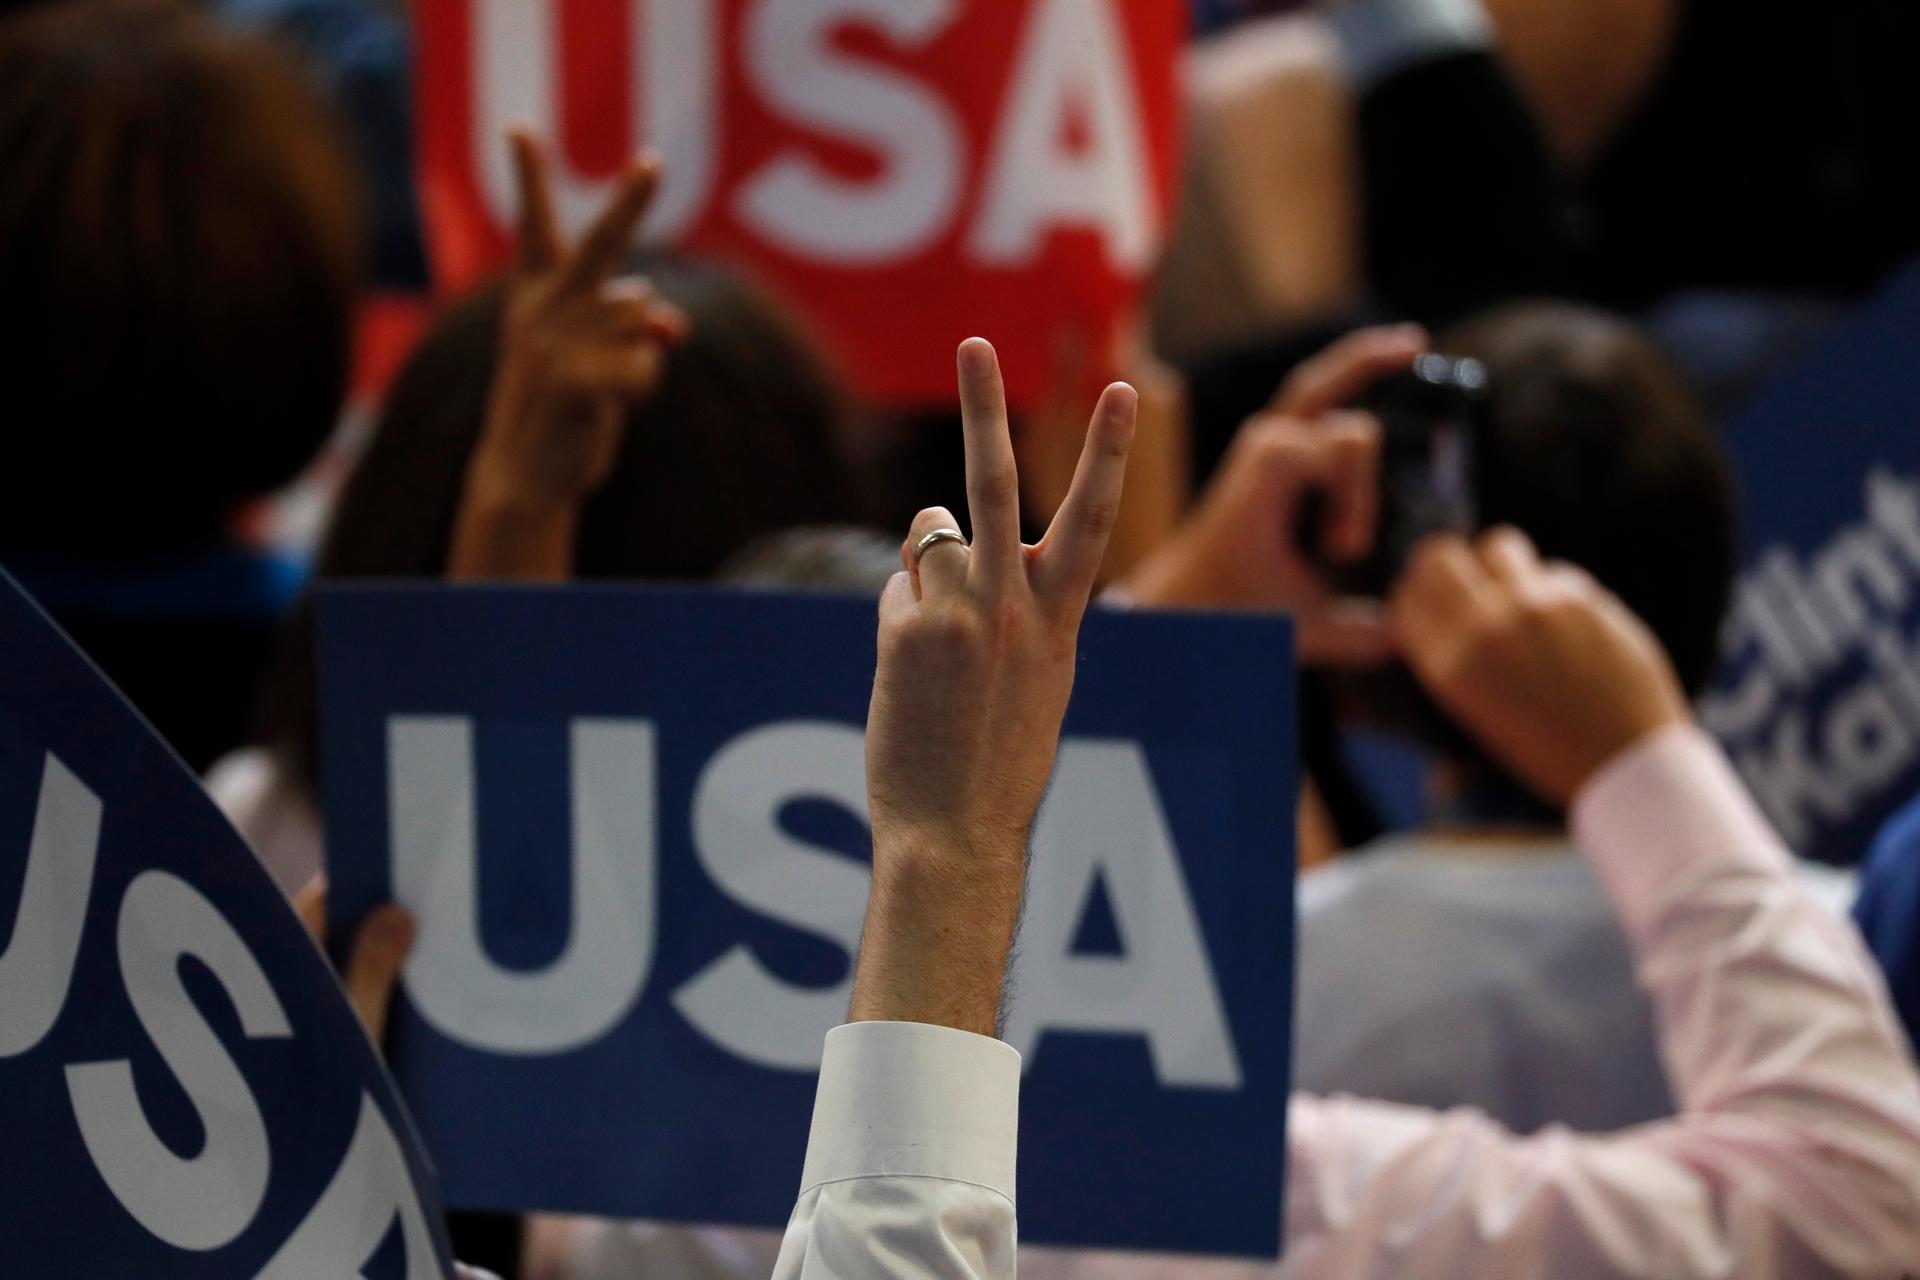 A delegate makes a victory sign.